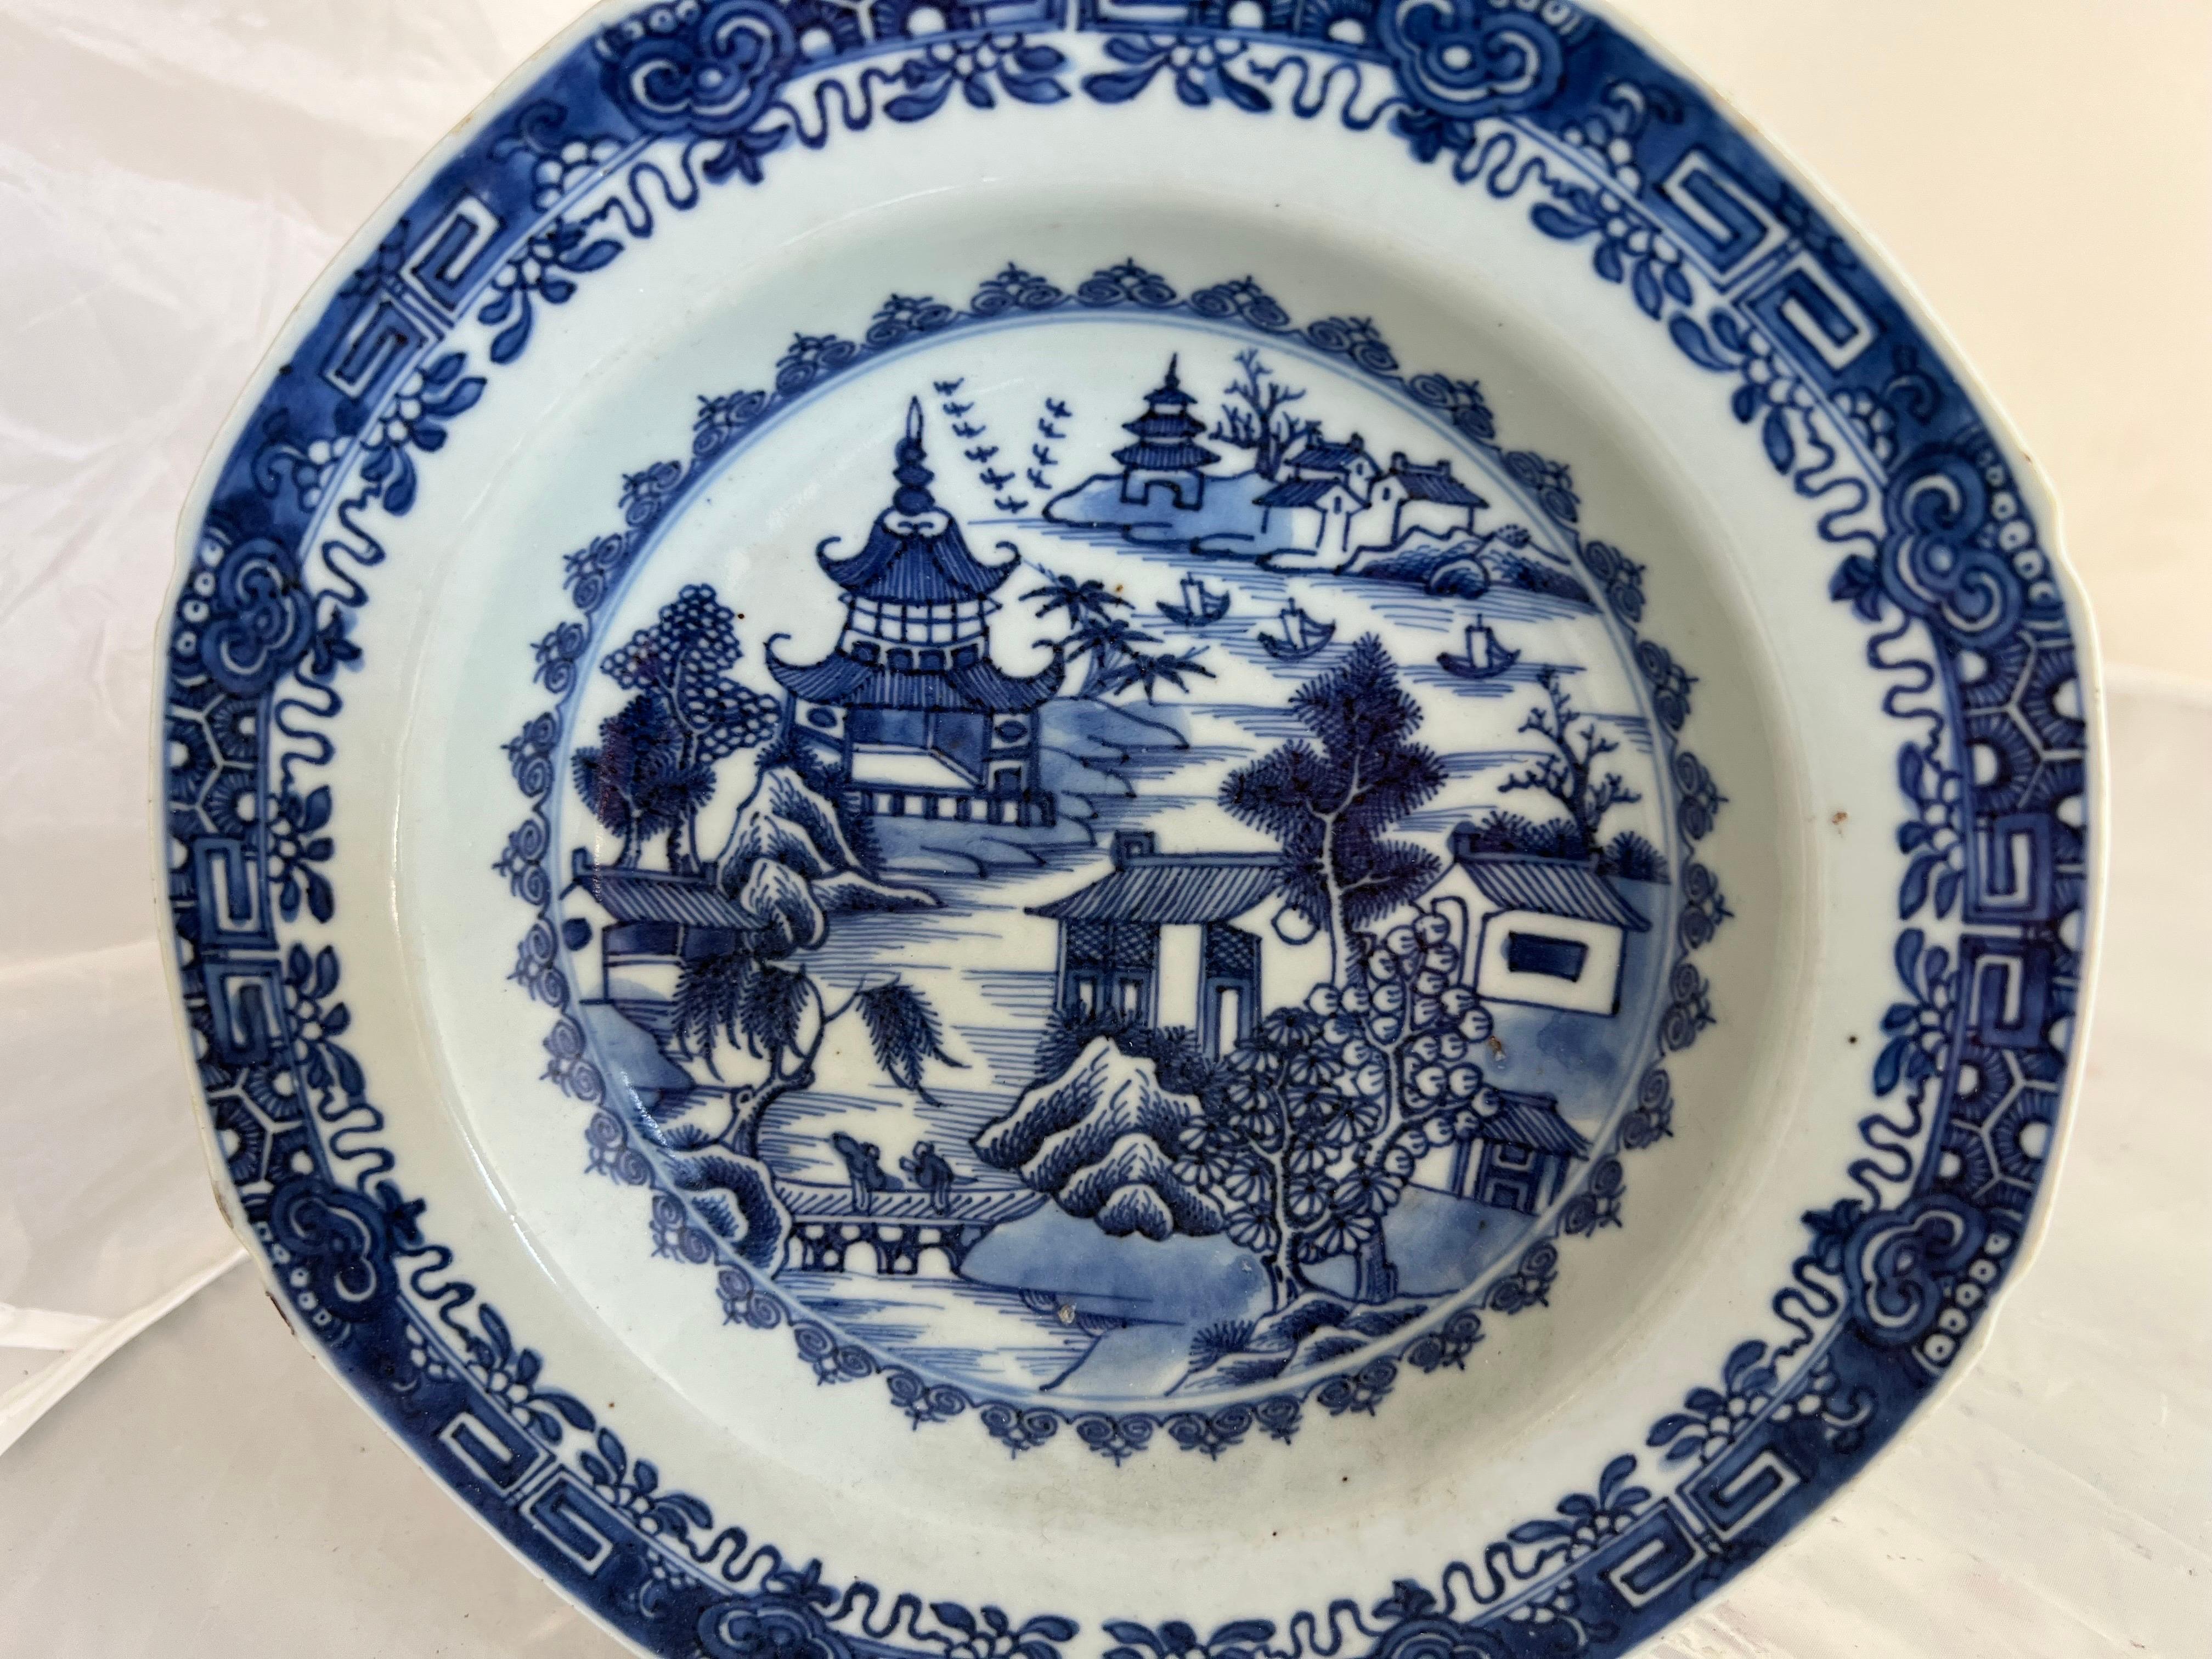 An 18th-century blue & white Chinese export plate in ironstone, depicting scenes with figures, boats, pagodas, houses, and trees, reflects the intricacy and artistry characteristic of that period.  Chinese export wares, know for their distinctive